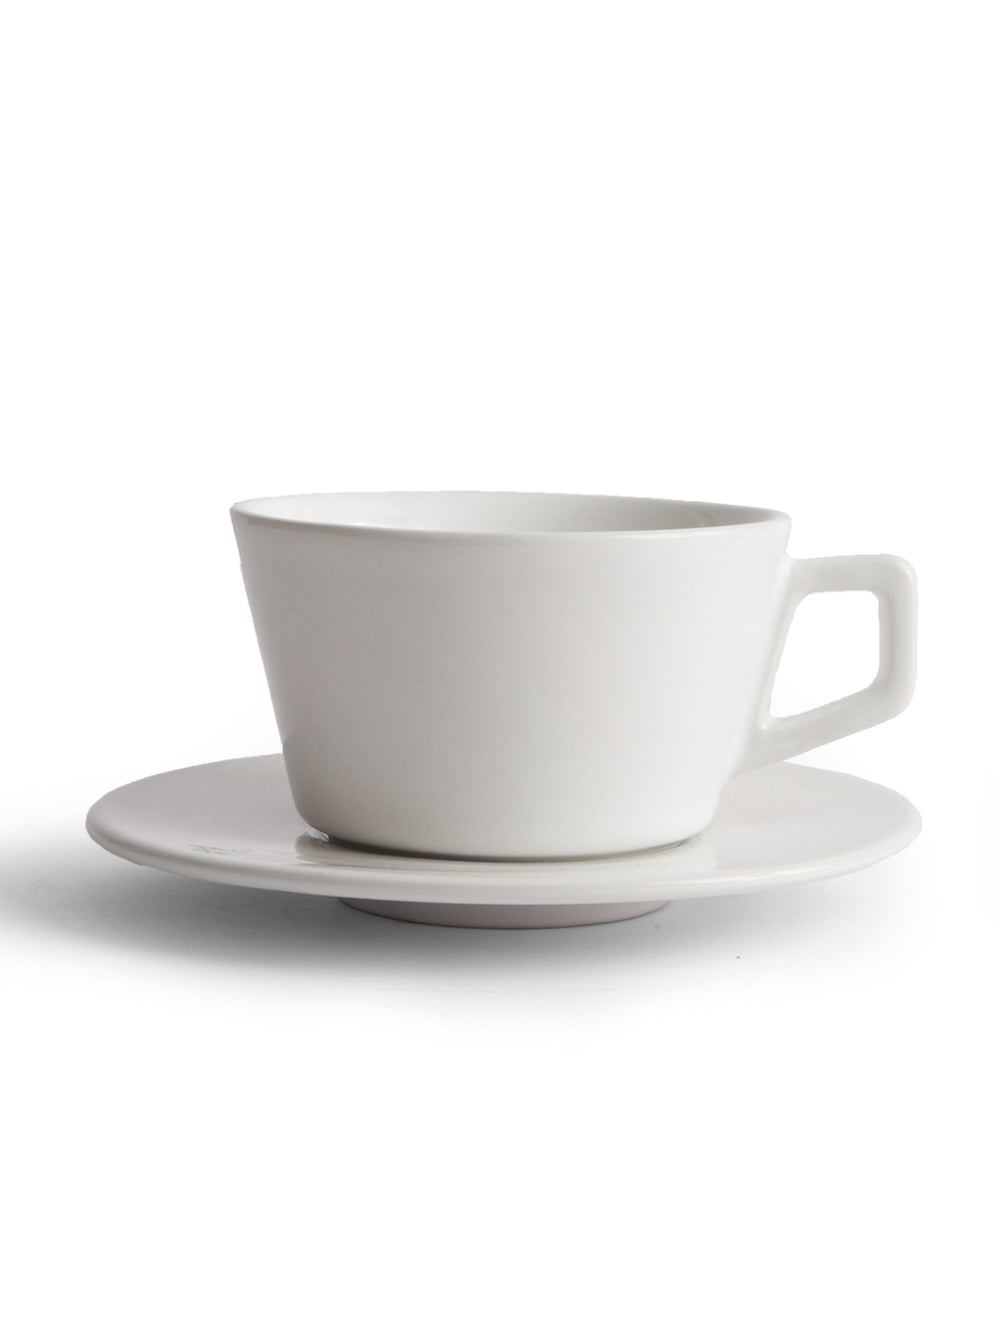 CREATED CO. Angle Espresso Saucer (Saucer Only) / Coffee Cups